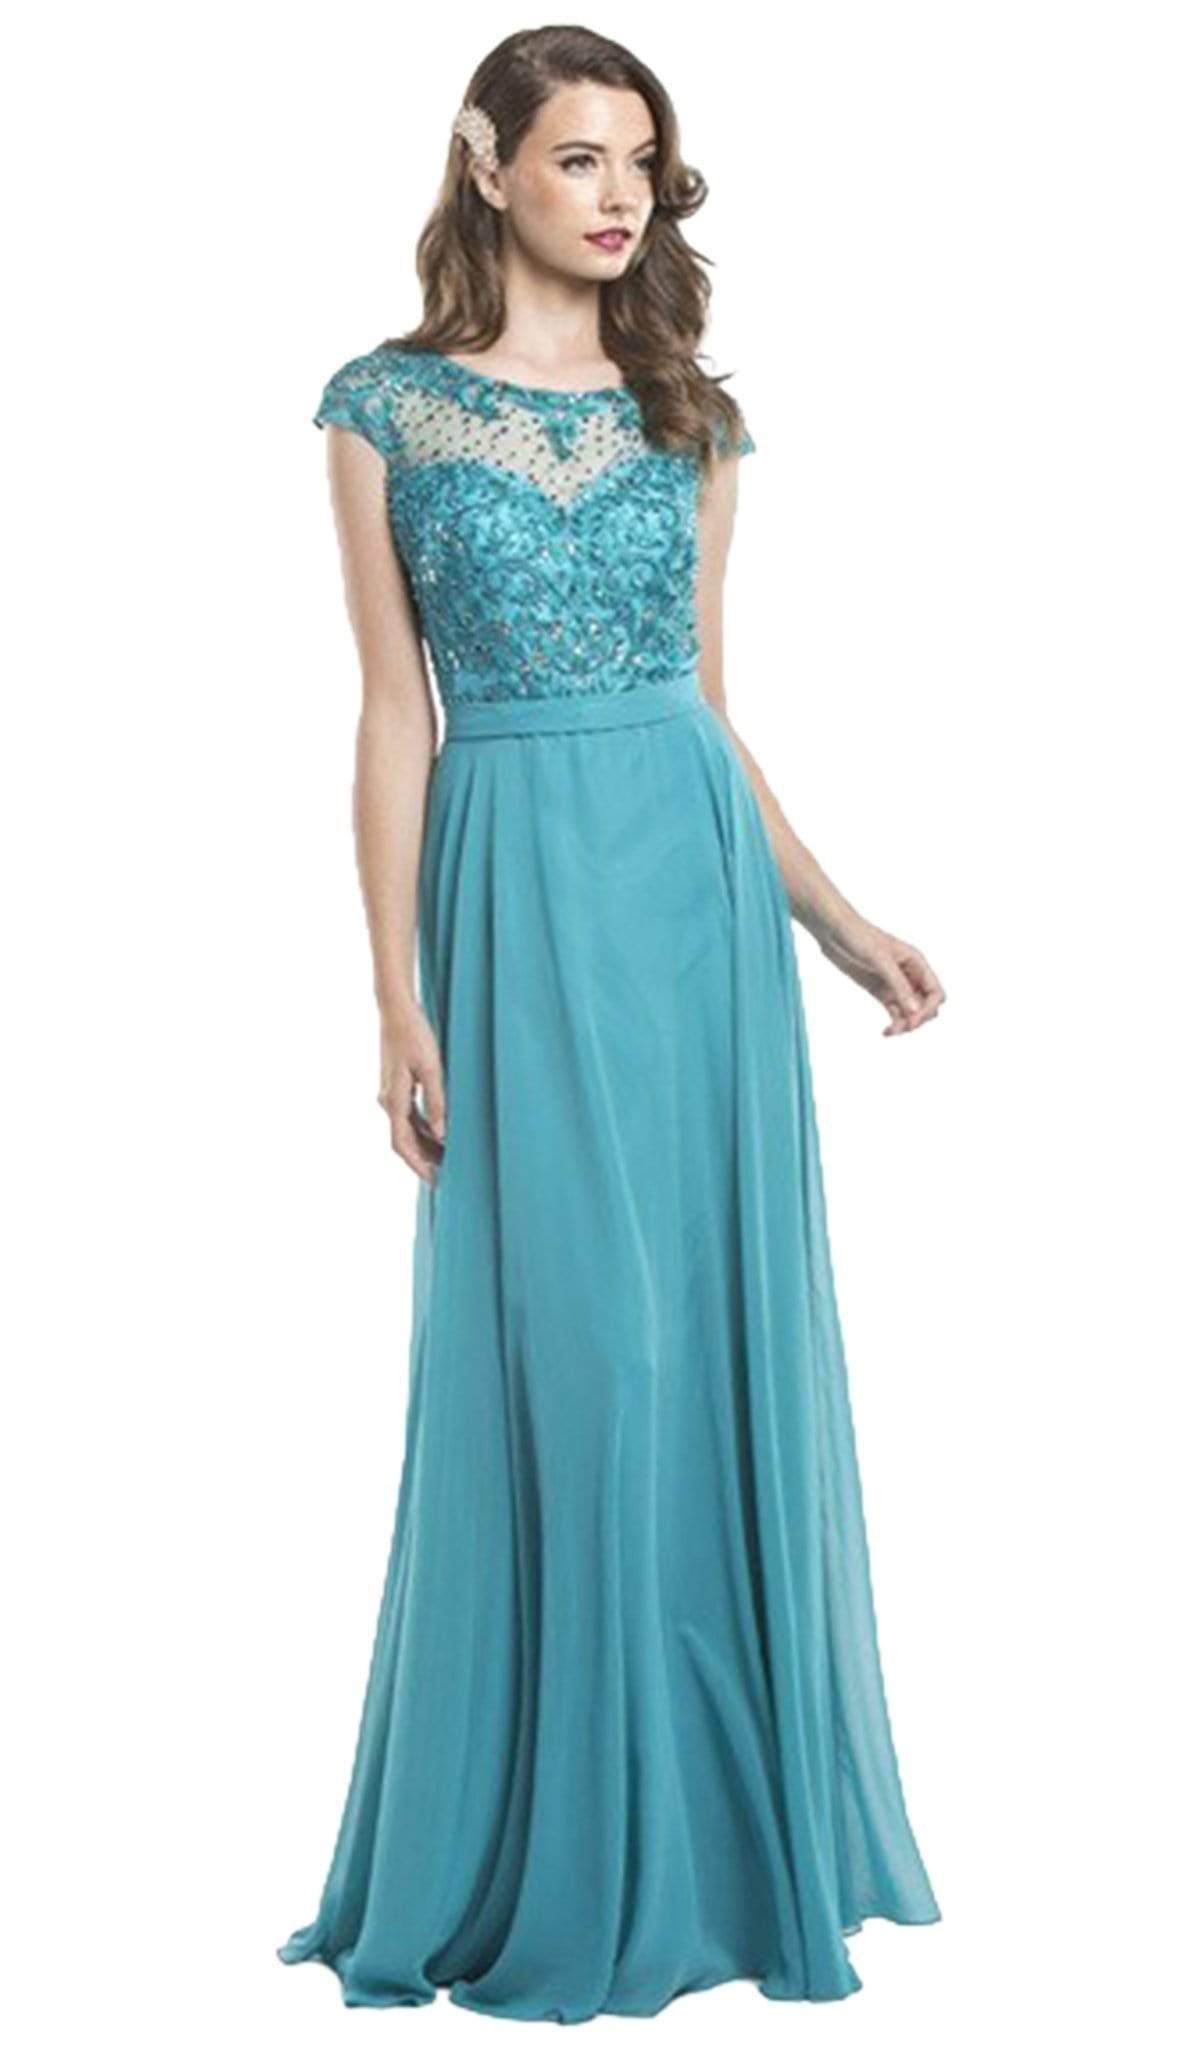 Image of Aspeed Design - Illusion Embroidered Long Formal Teal Dress